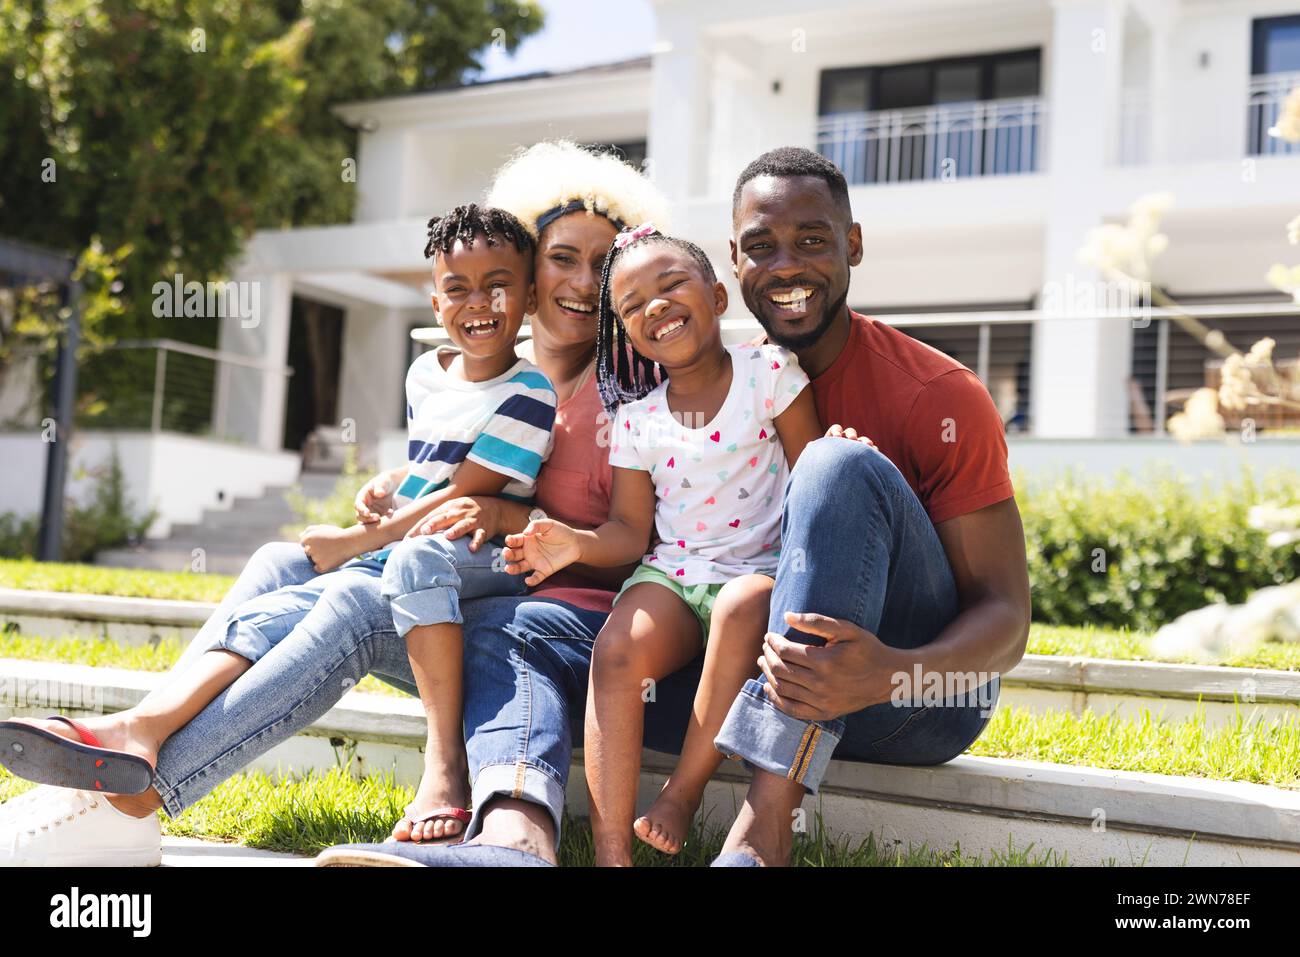 African American man and young biracial woman sit with a boy and a girl, all smiling Stock Photo